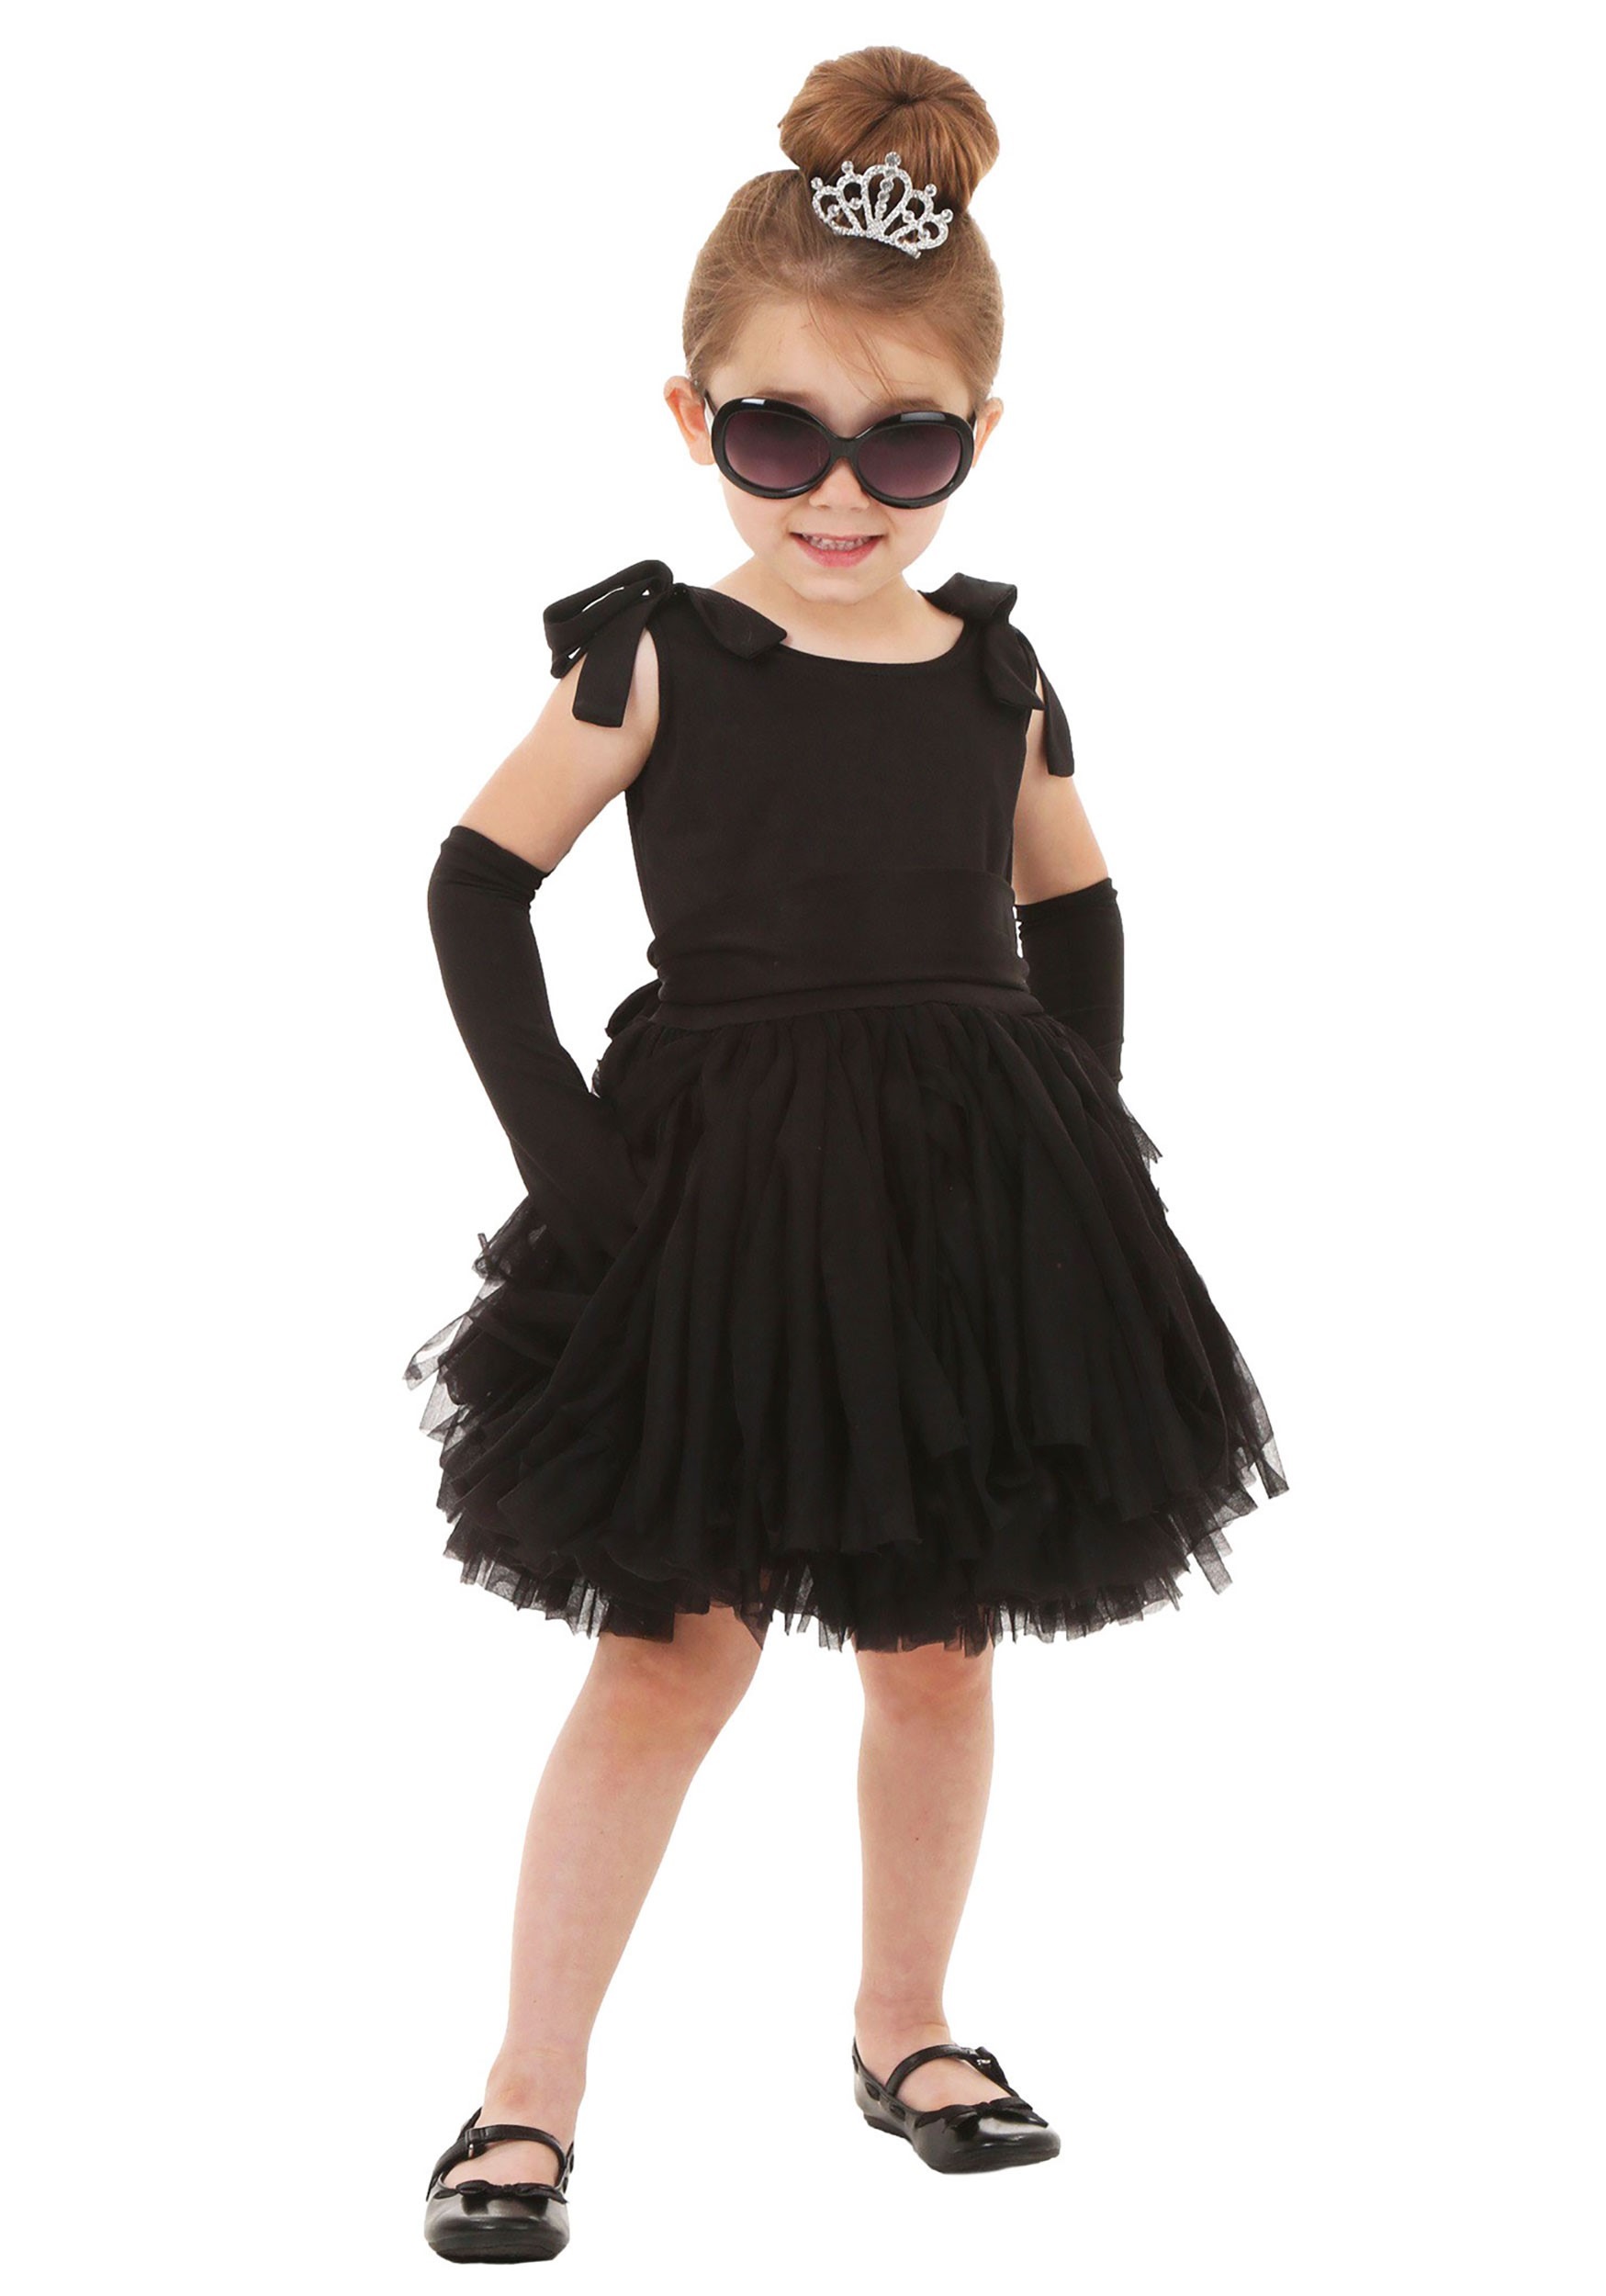 Photos - Fancy Dress Toddler FUN Costumes Breakfast at Tiffany's Holly Golightly  Costume Black 